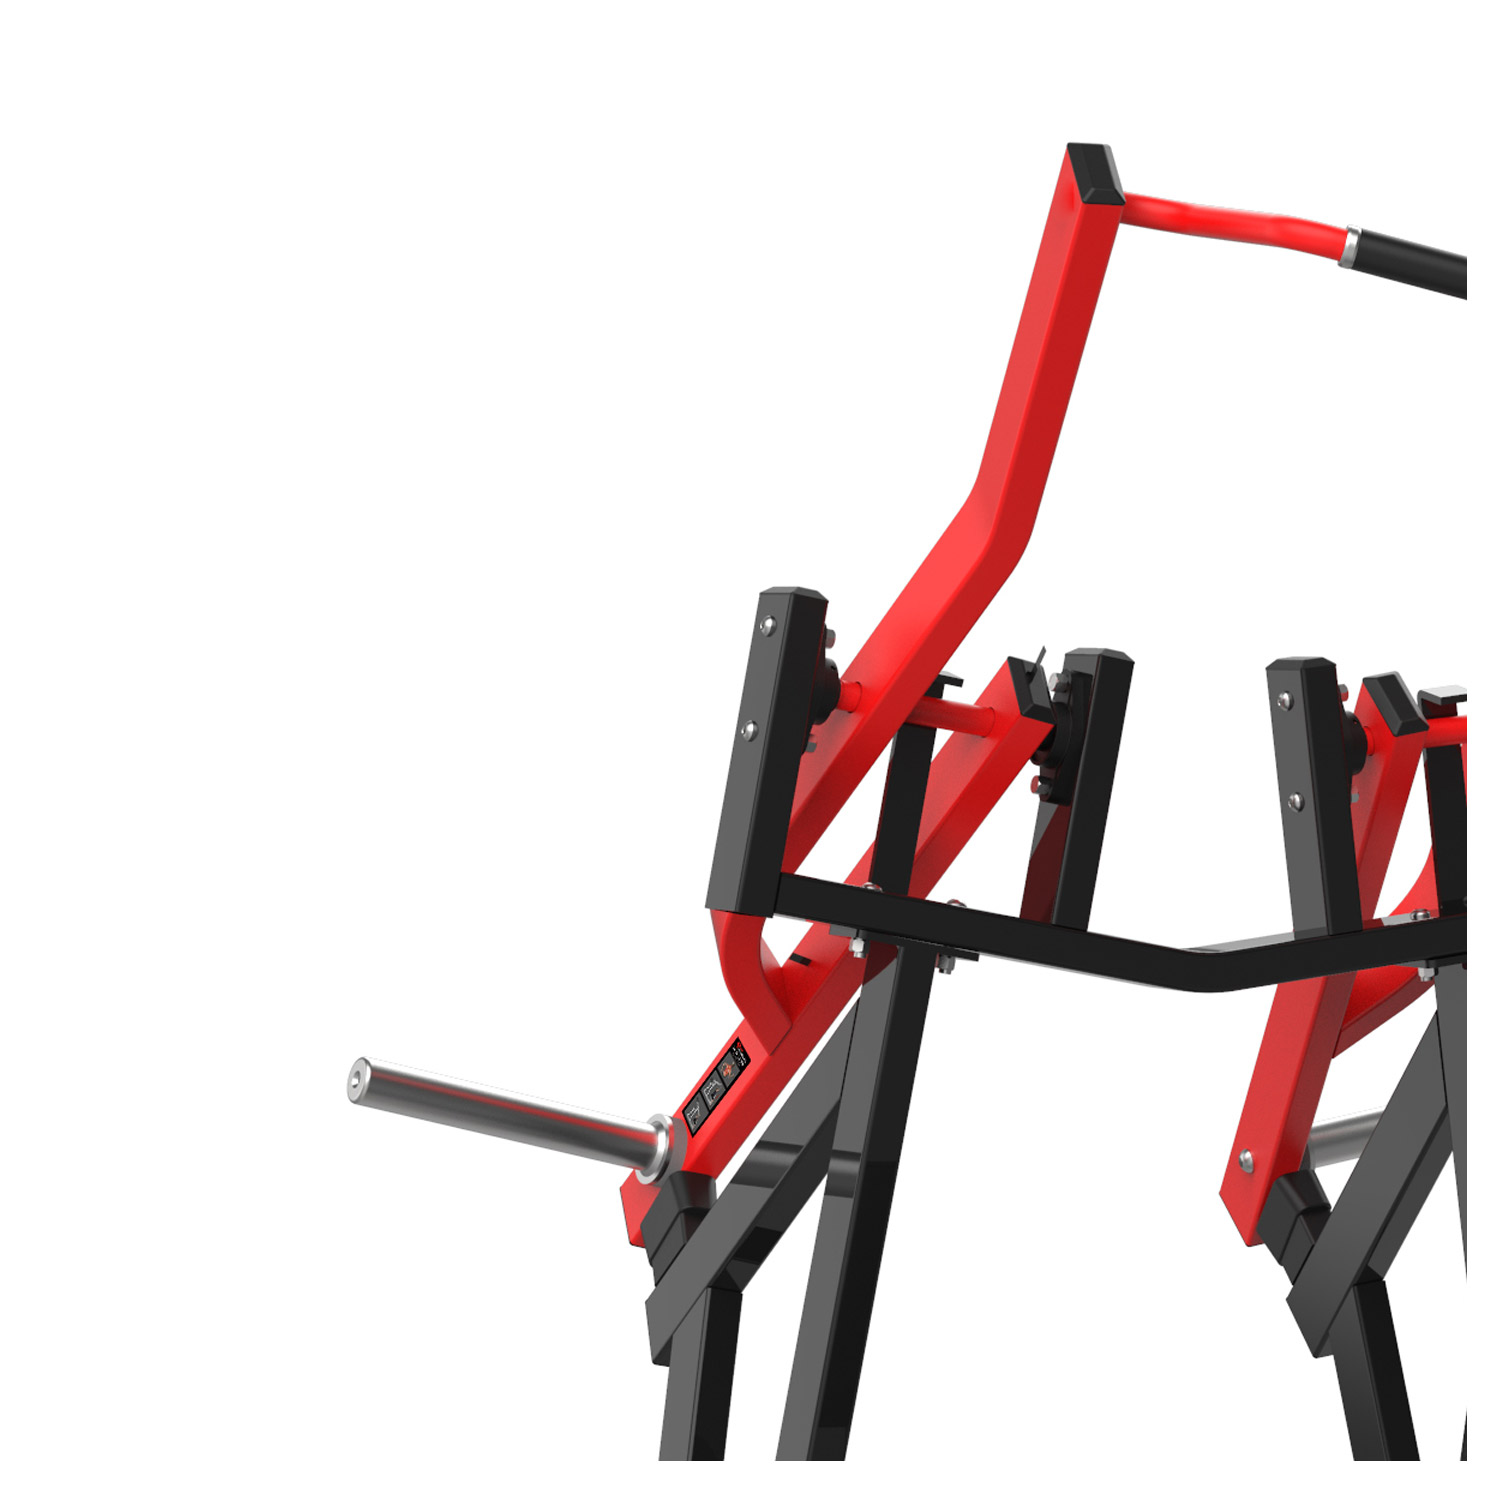 HS-1005 Iso-lateral Front Lat Pulldown